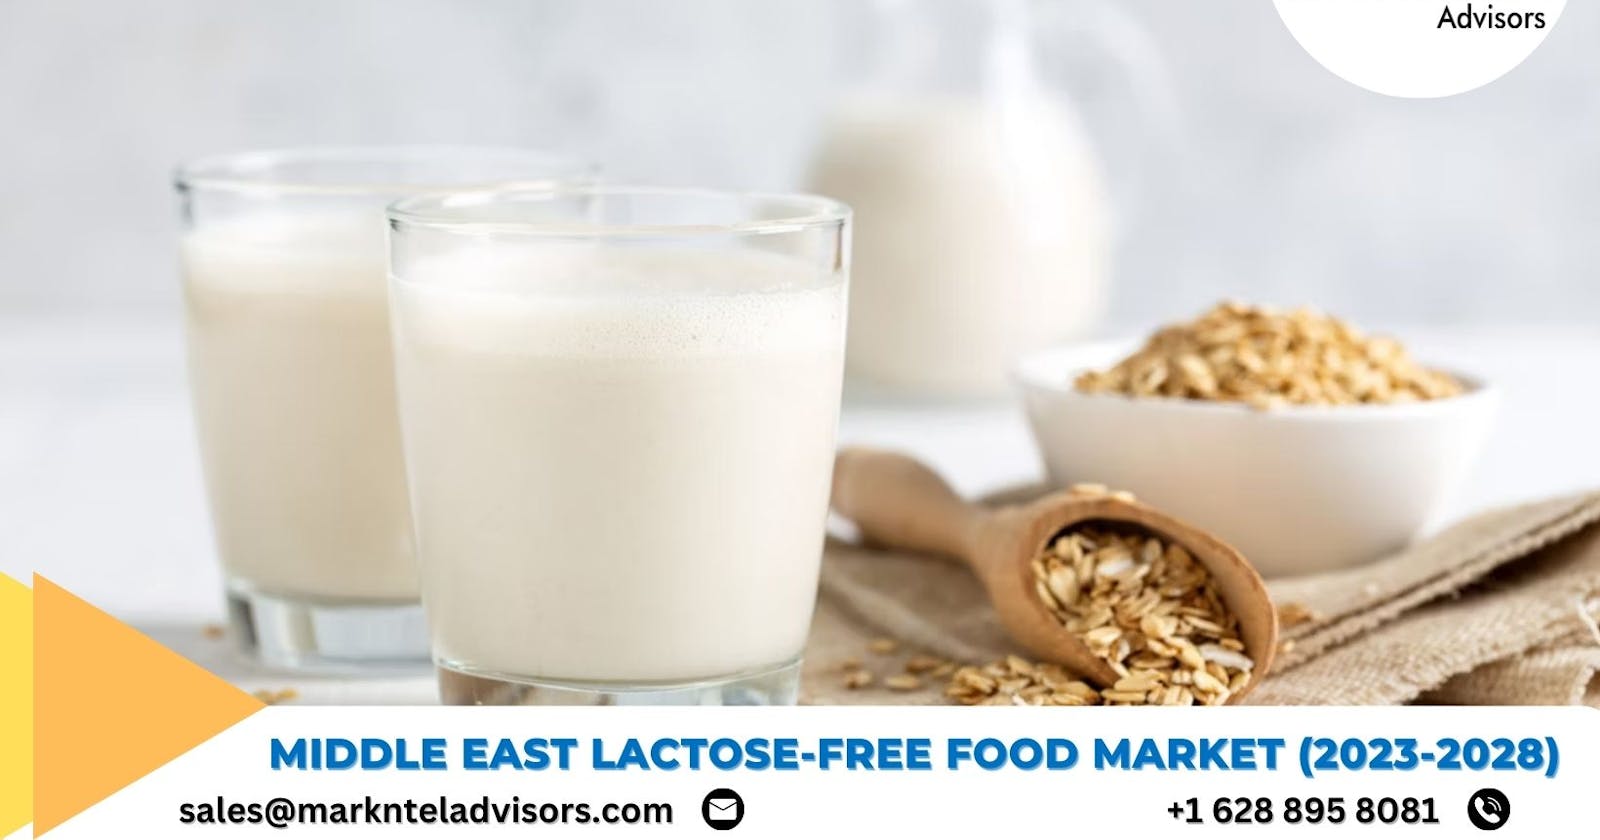 Uncovering Key Growth Opportunities in the Middle East Lactose-Free Food Market